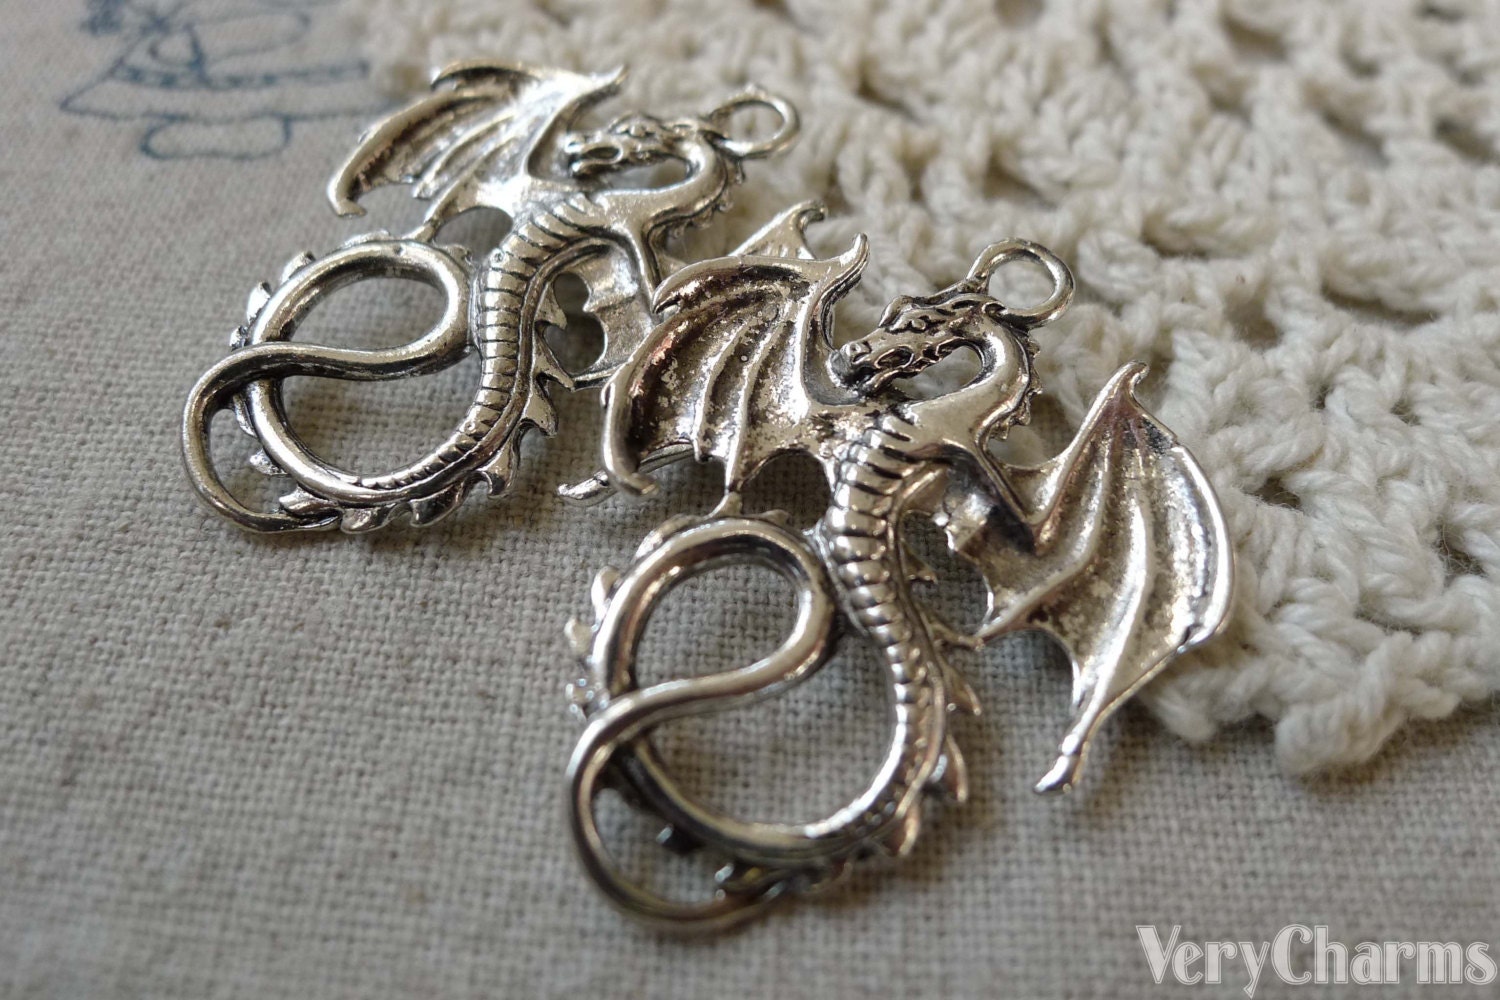 12pcs/bag 27x11mm Flying Dragon Charms For Jewelry Making